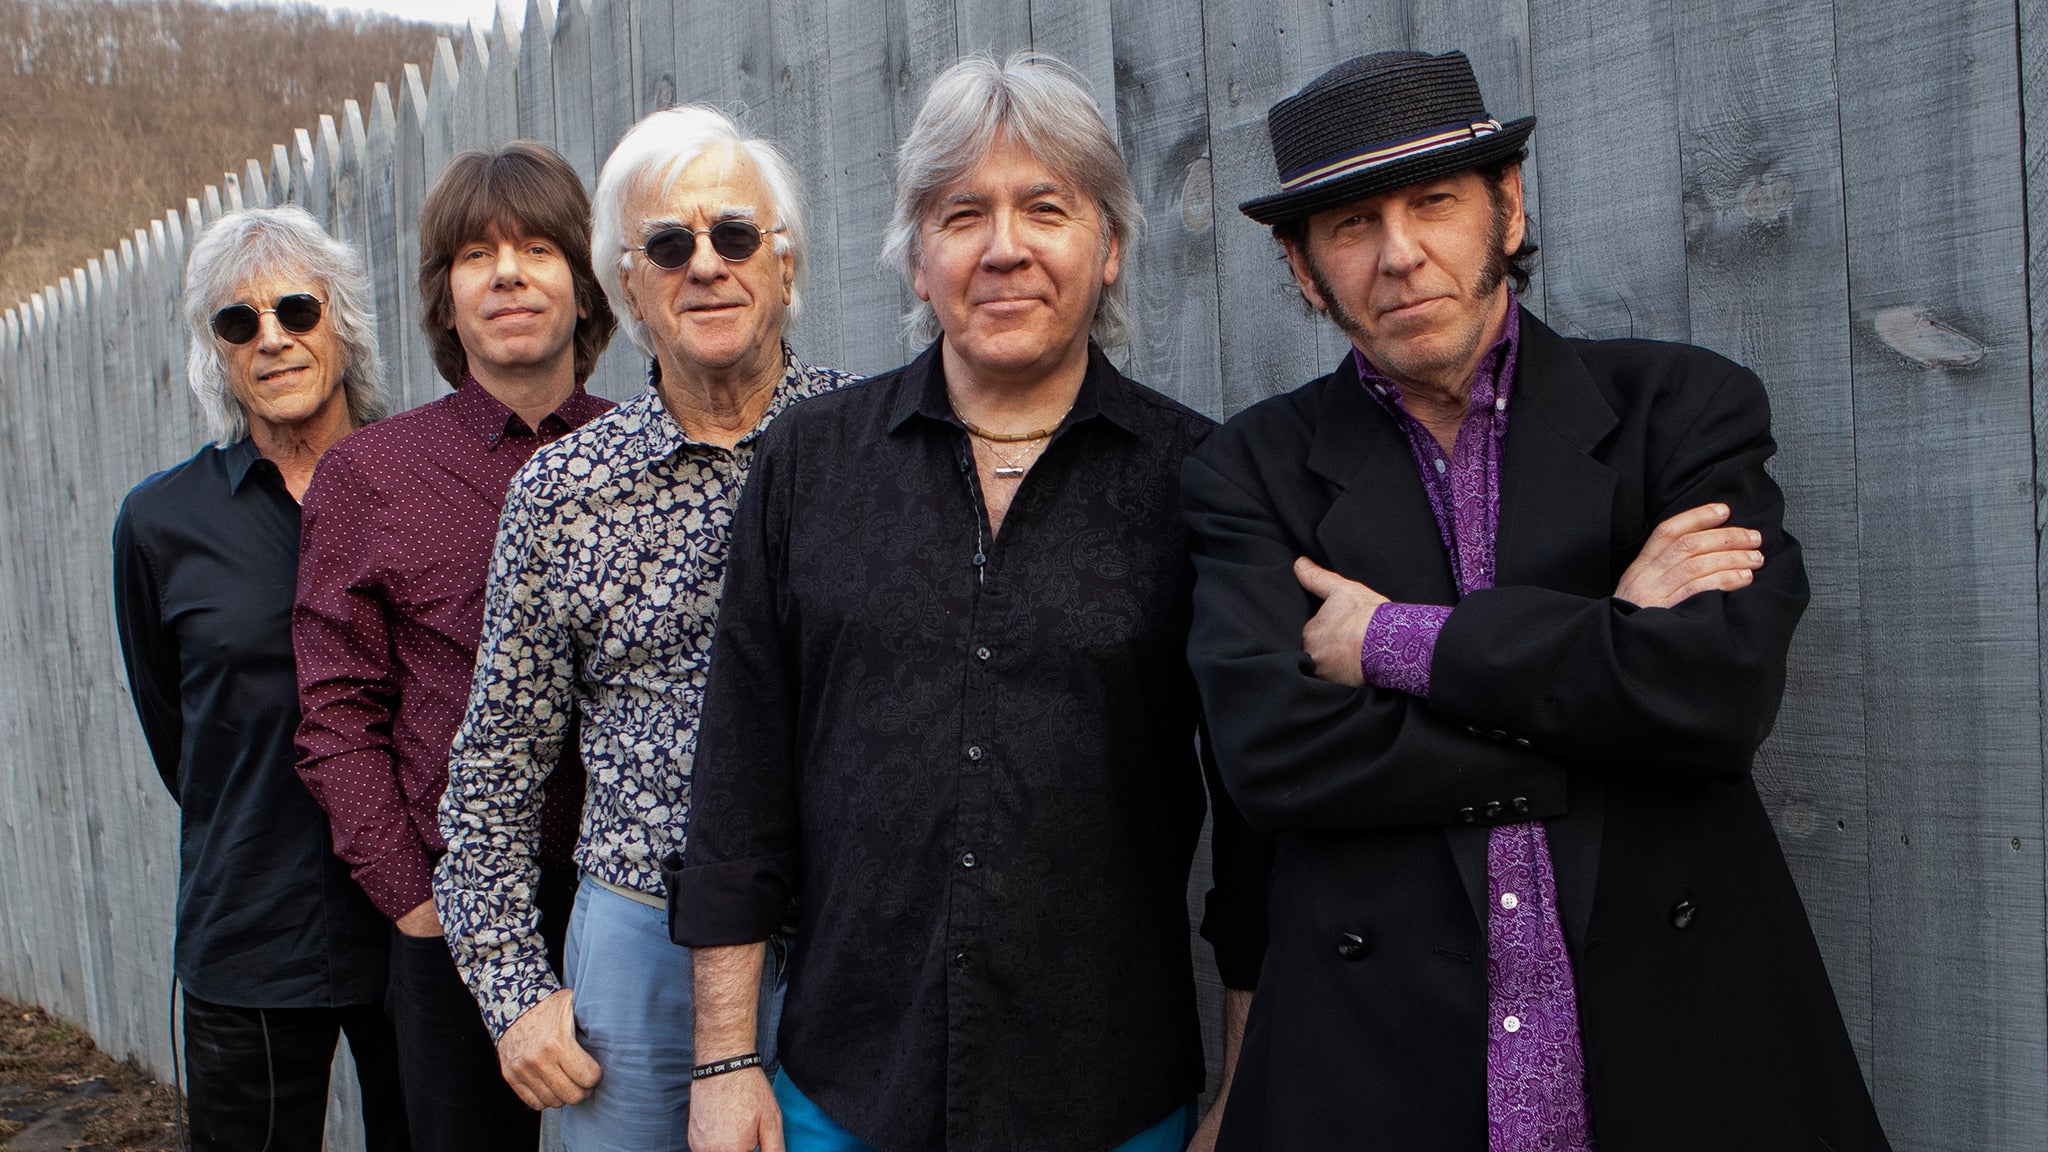 The Yardbirds and Big Brother & The Holding Company in Staten Island promo photo for St. George Theatre Member presale offer code